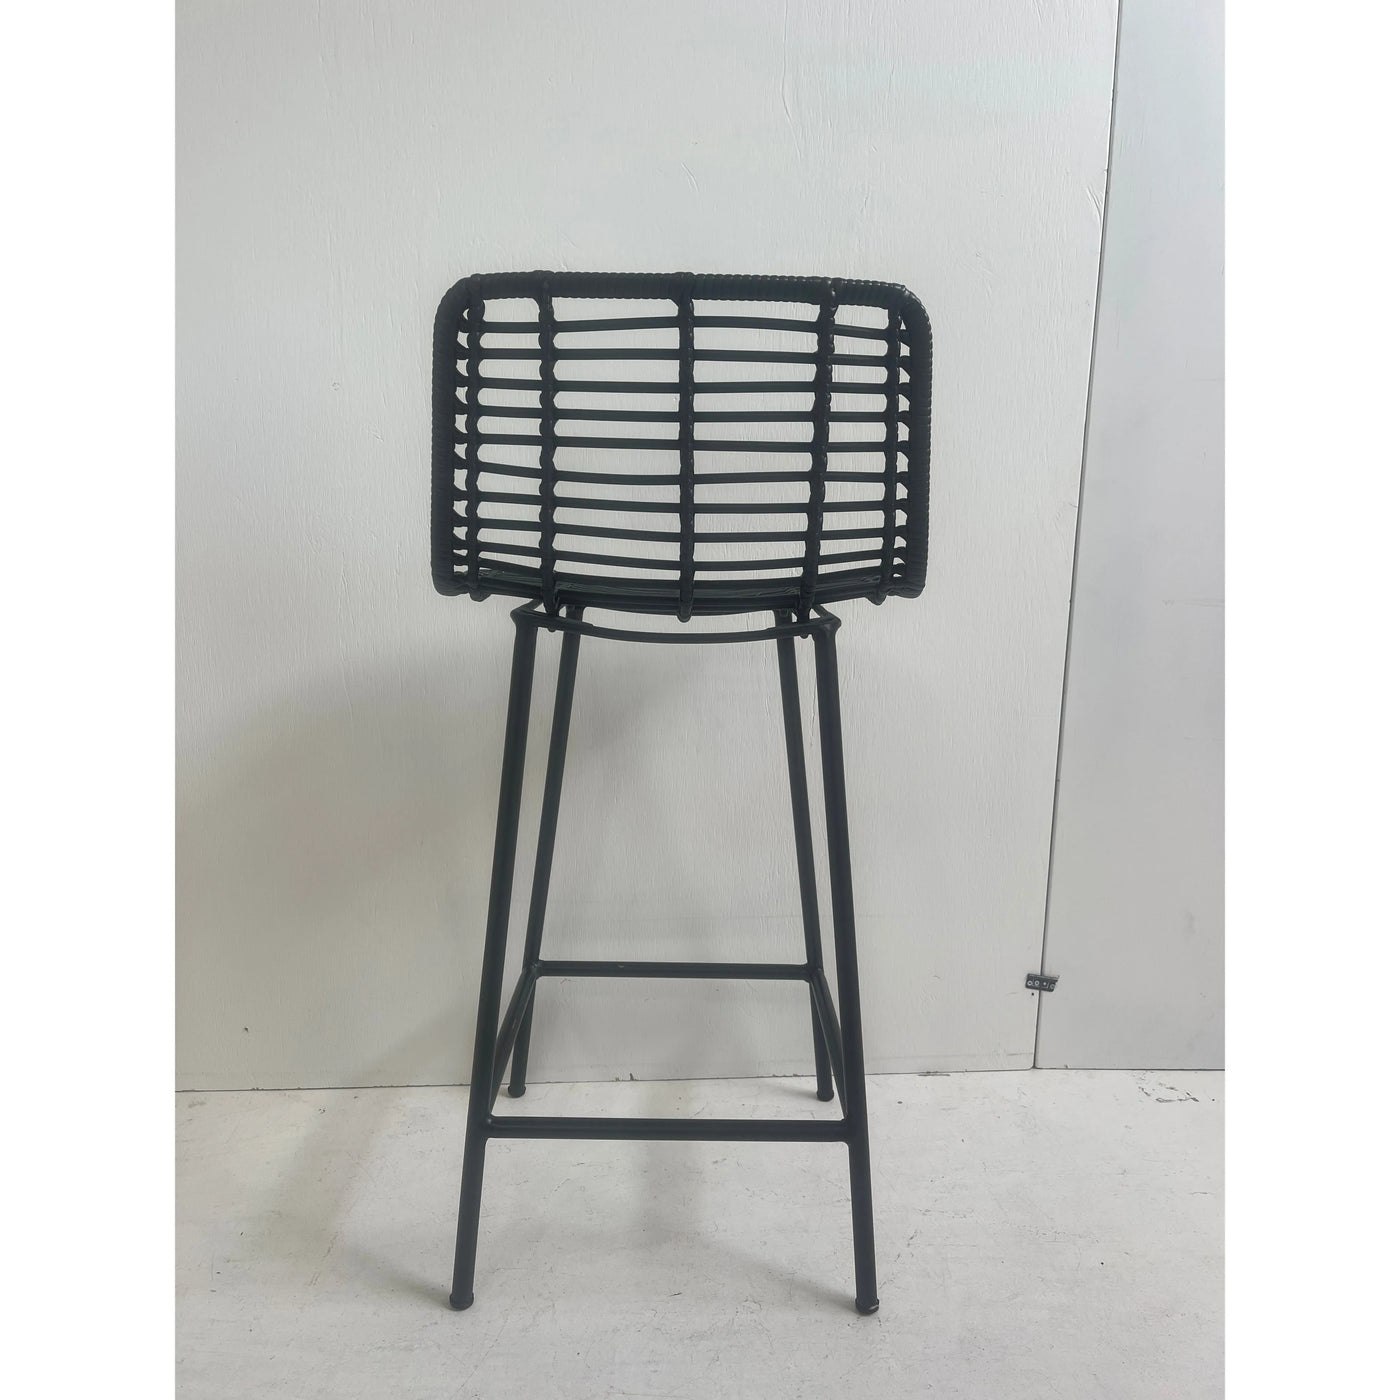 Barstool 660mm Seating Height